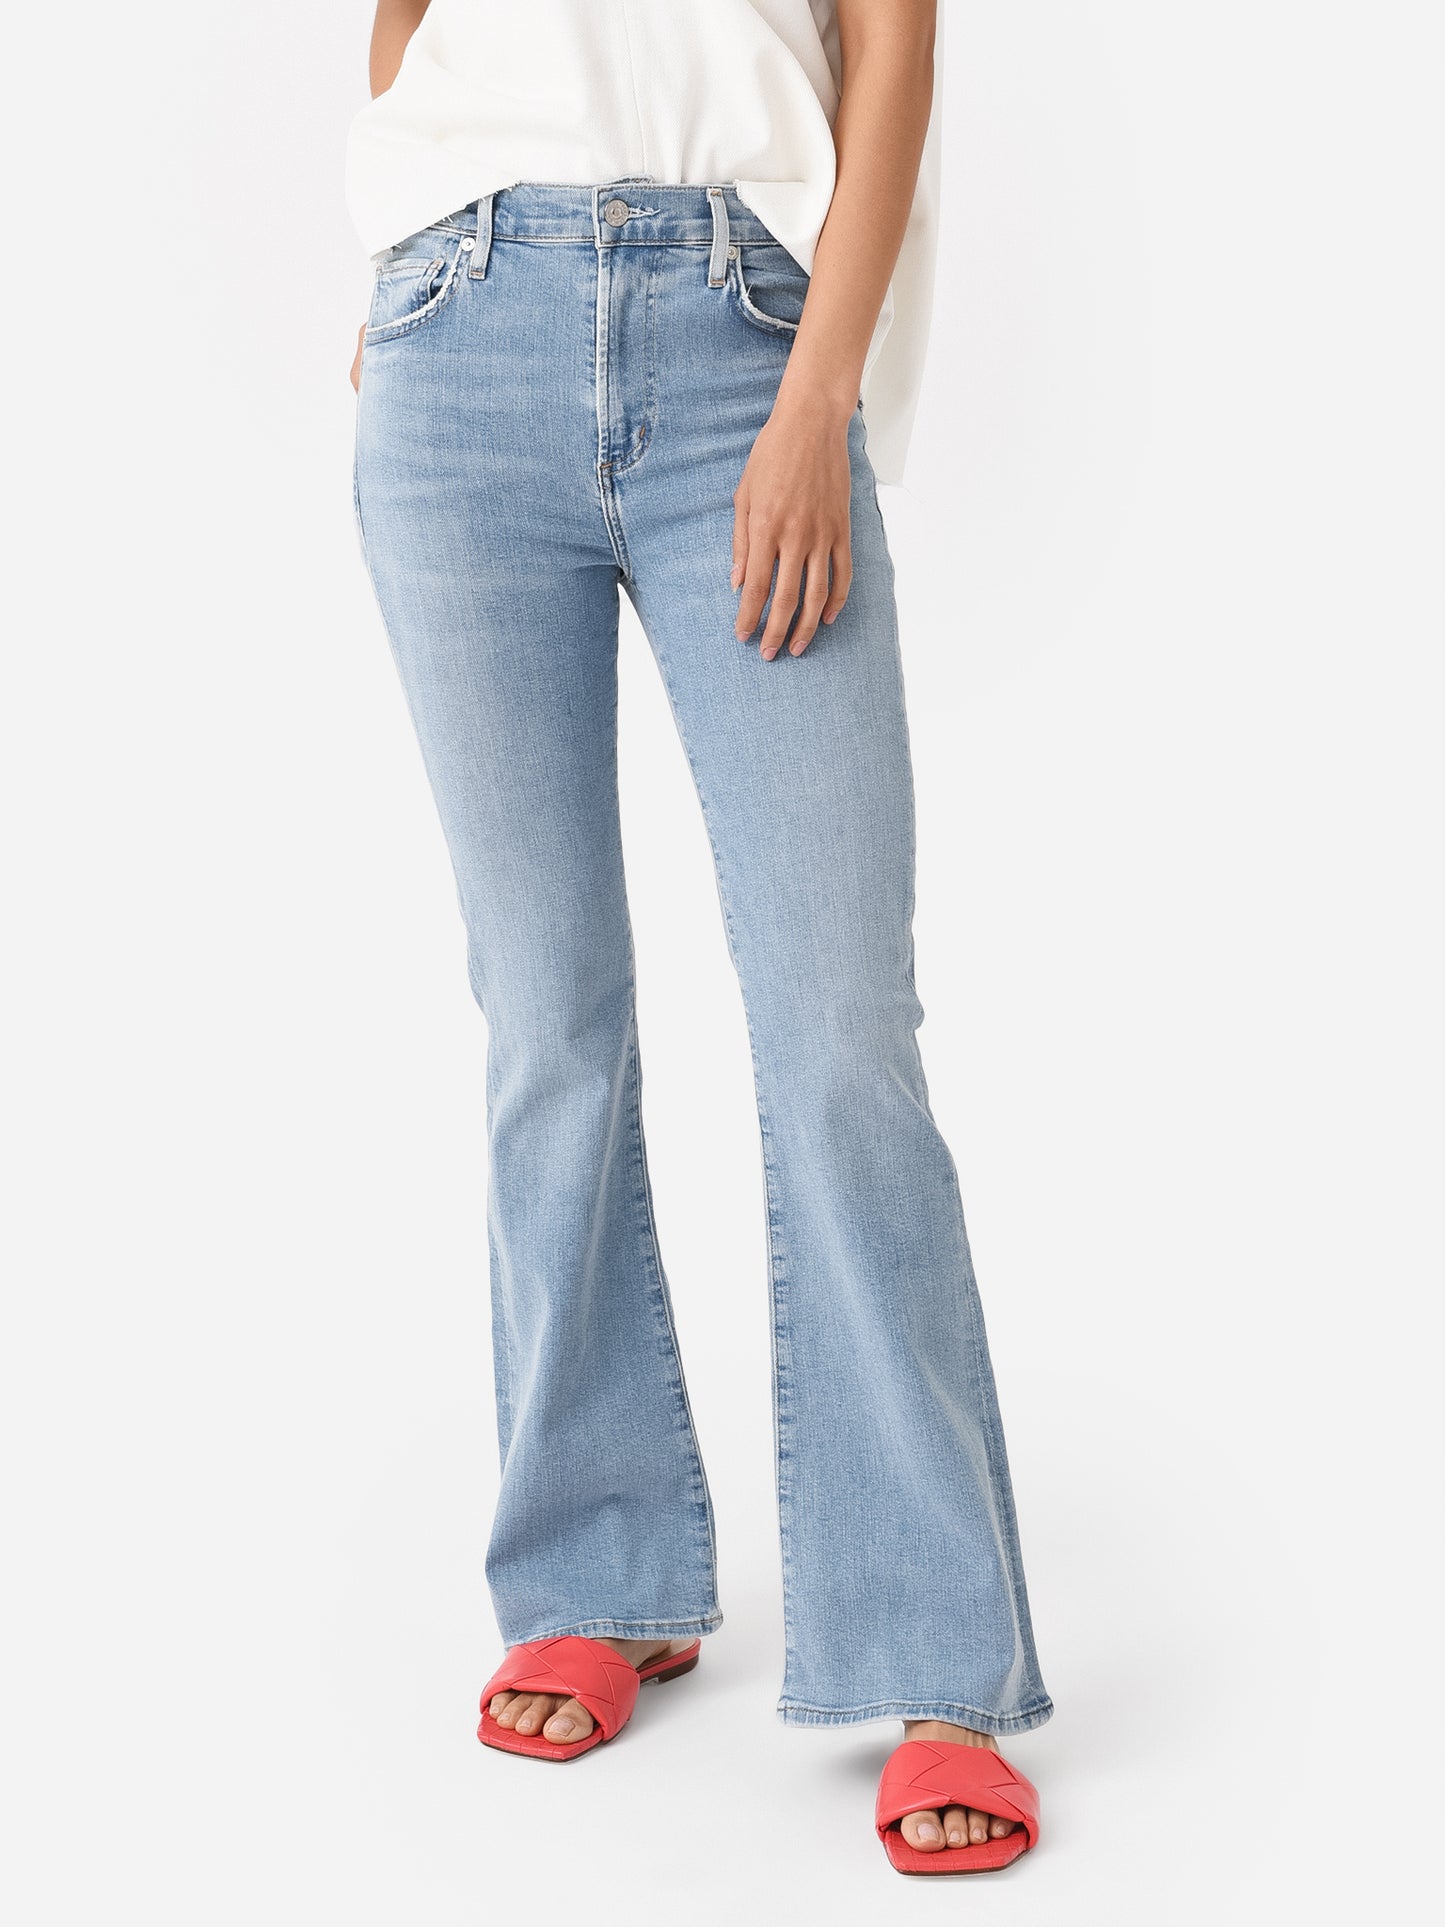 Citizens Of Humanity Women's Lilah High Rise Bootcut Jean